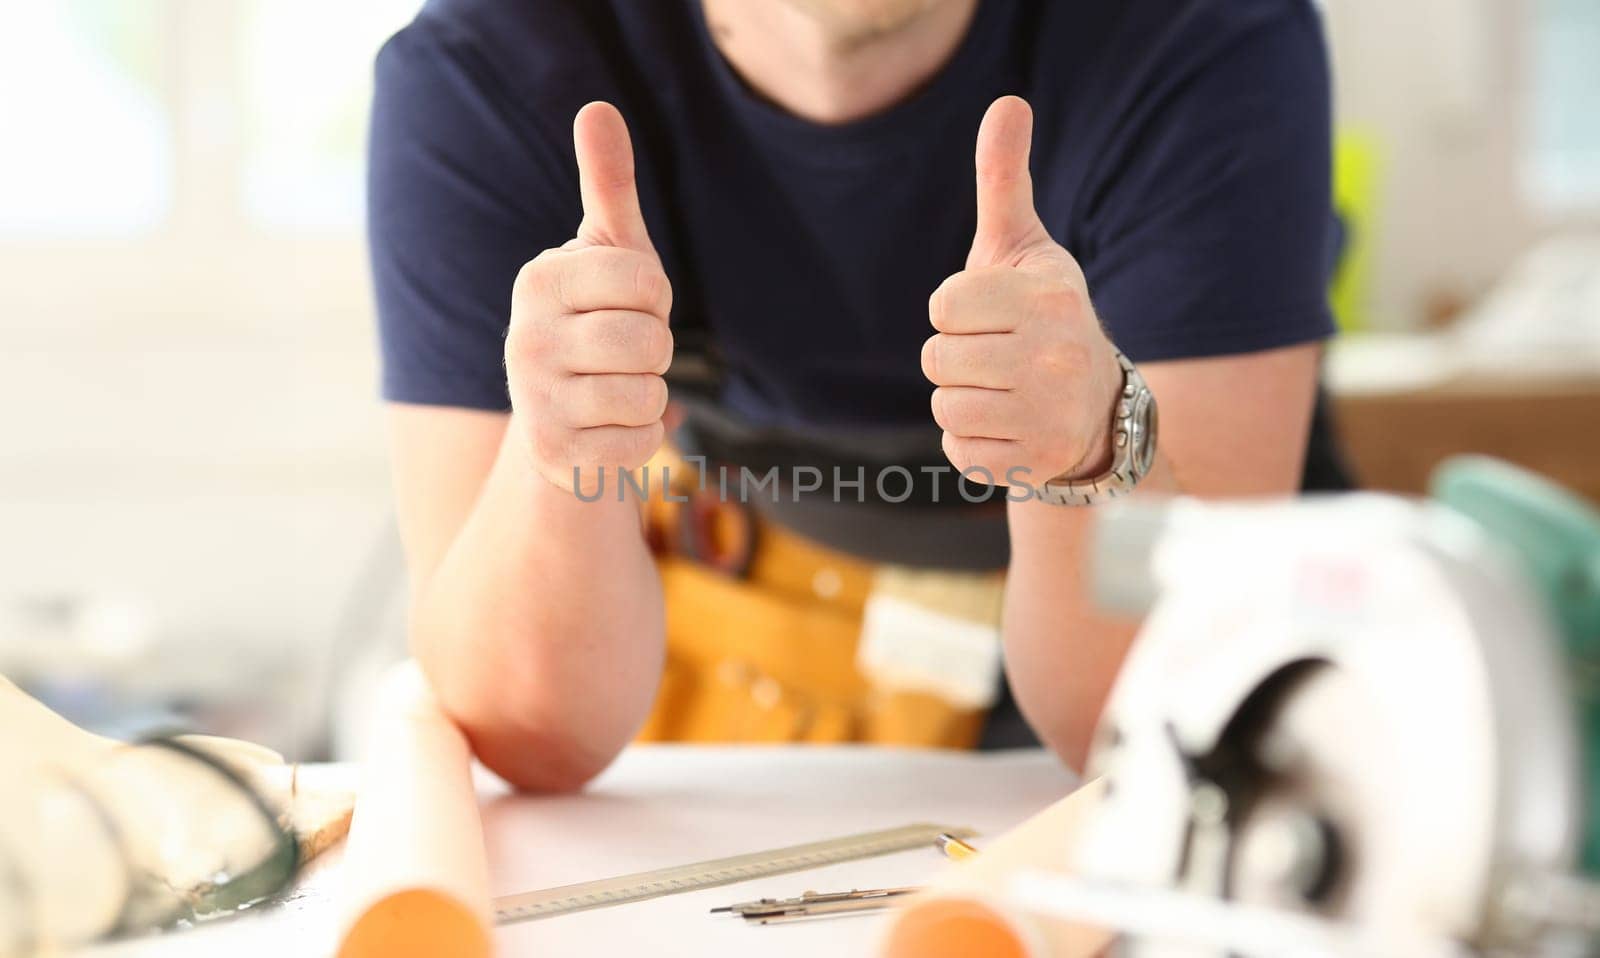 Arm of worker show confirm sign with thumb up closeup. Manual job DIY inspiration joinery startup idea fix shop hard hat industrial education profession career concept